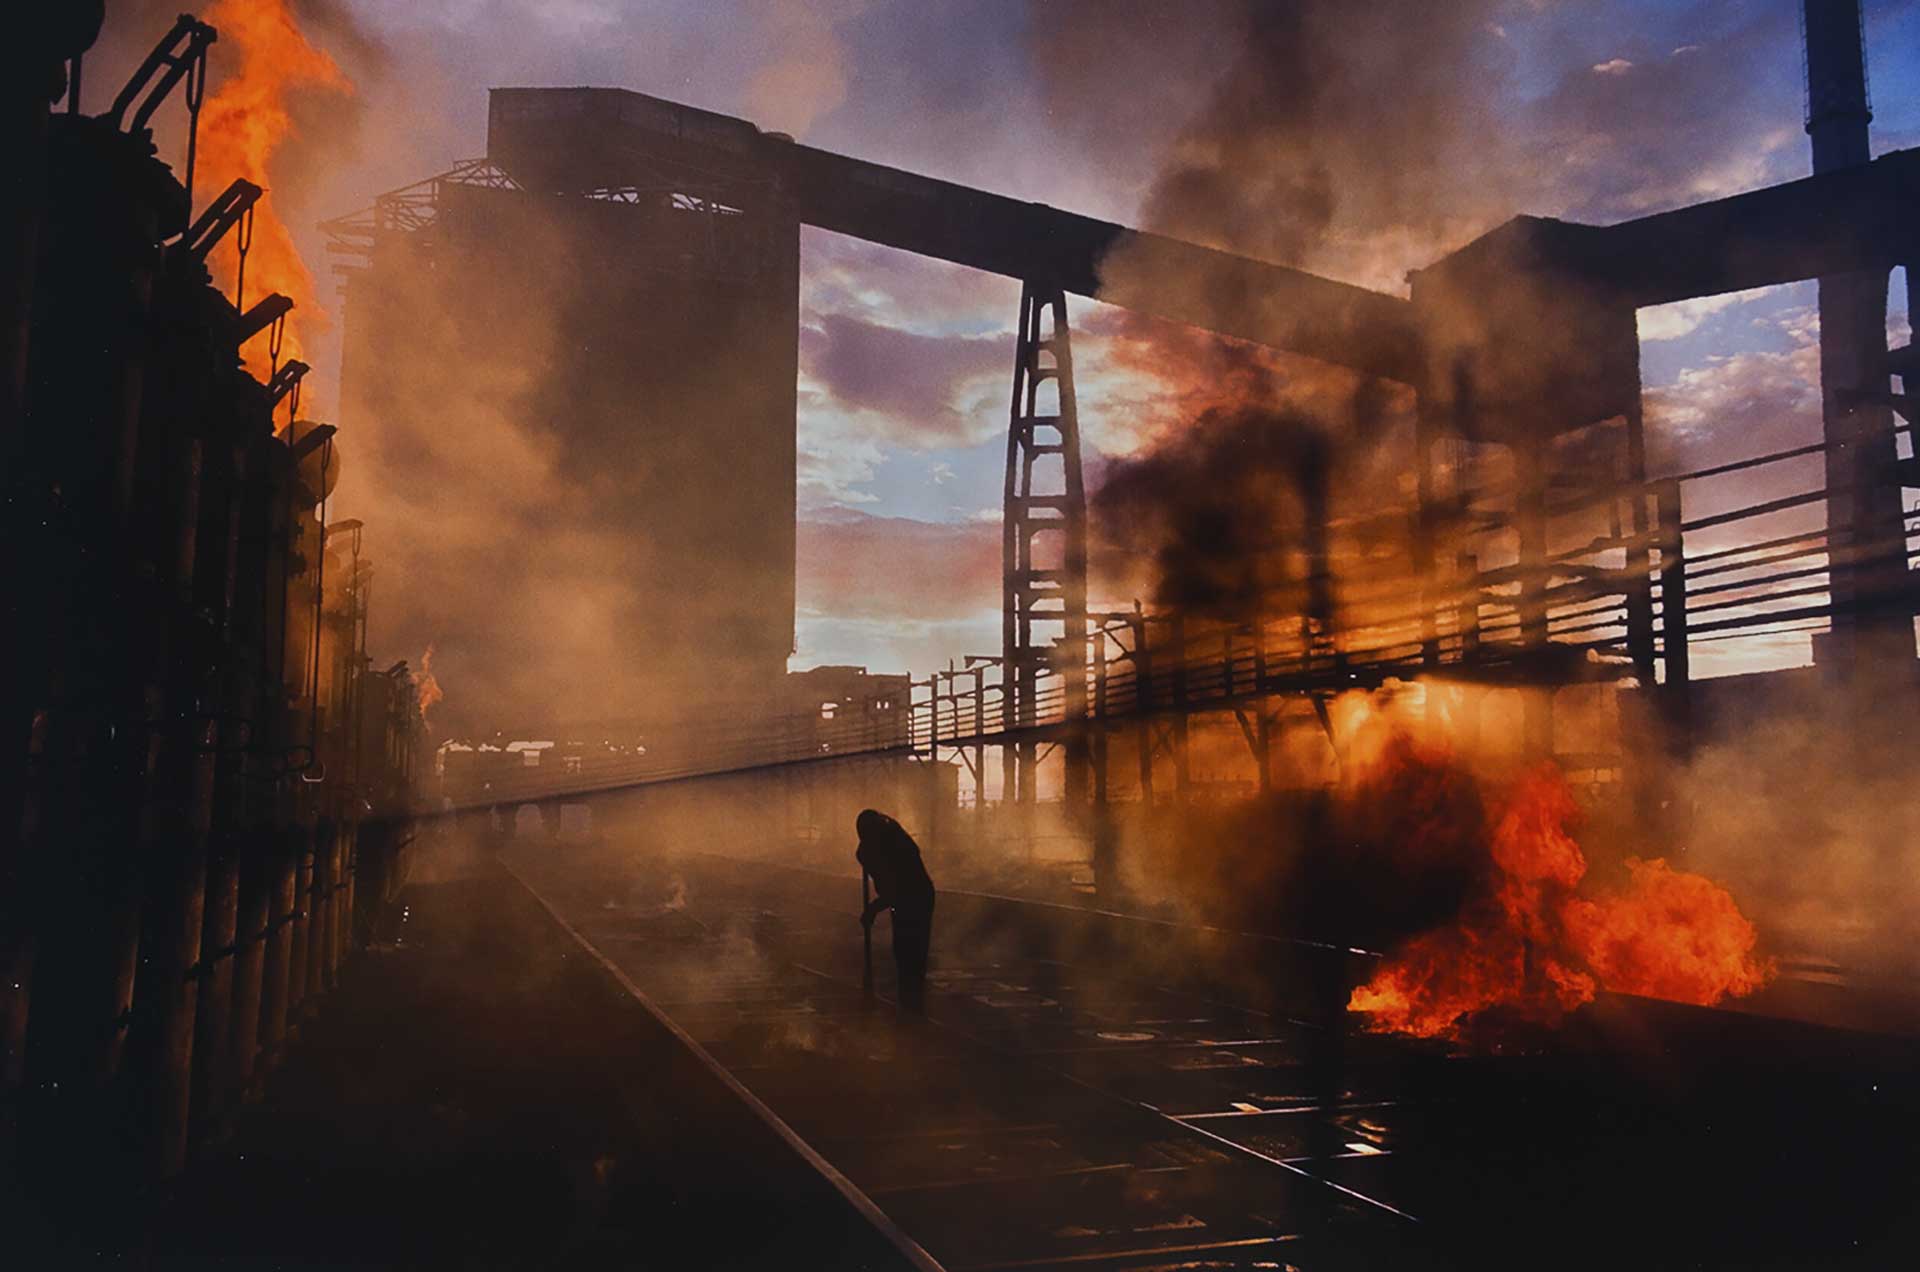 Silhouette of a person sweeping railway tracks, with large fires burning on either side of them. The fires are bright orange and produce thick black smoke. There are large industrial-like structures in the background.